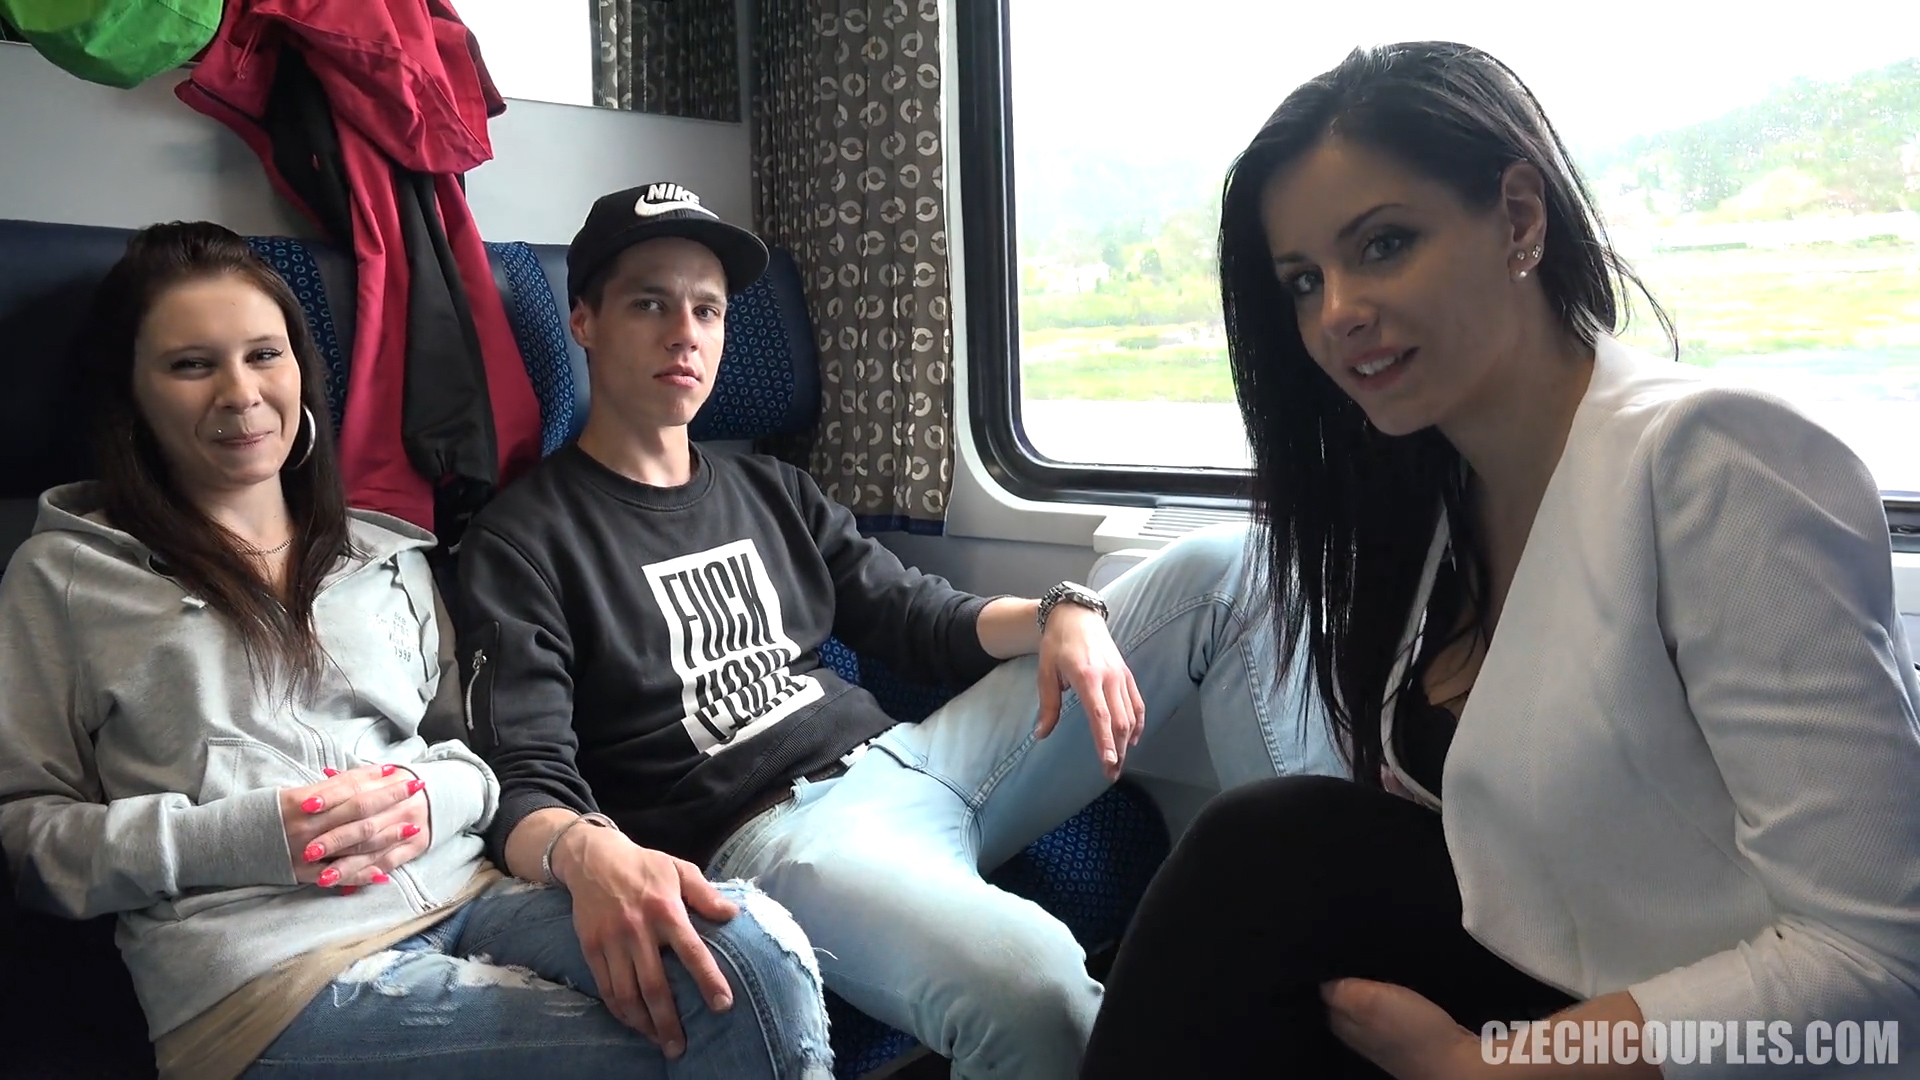 Young couple agrees to enjoy sex with strangers on a train pic